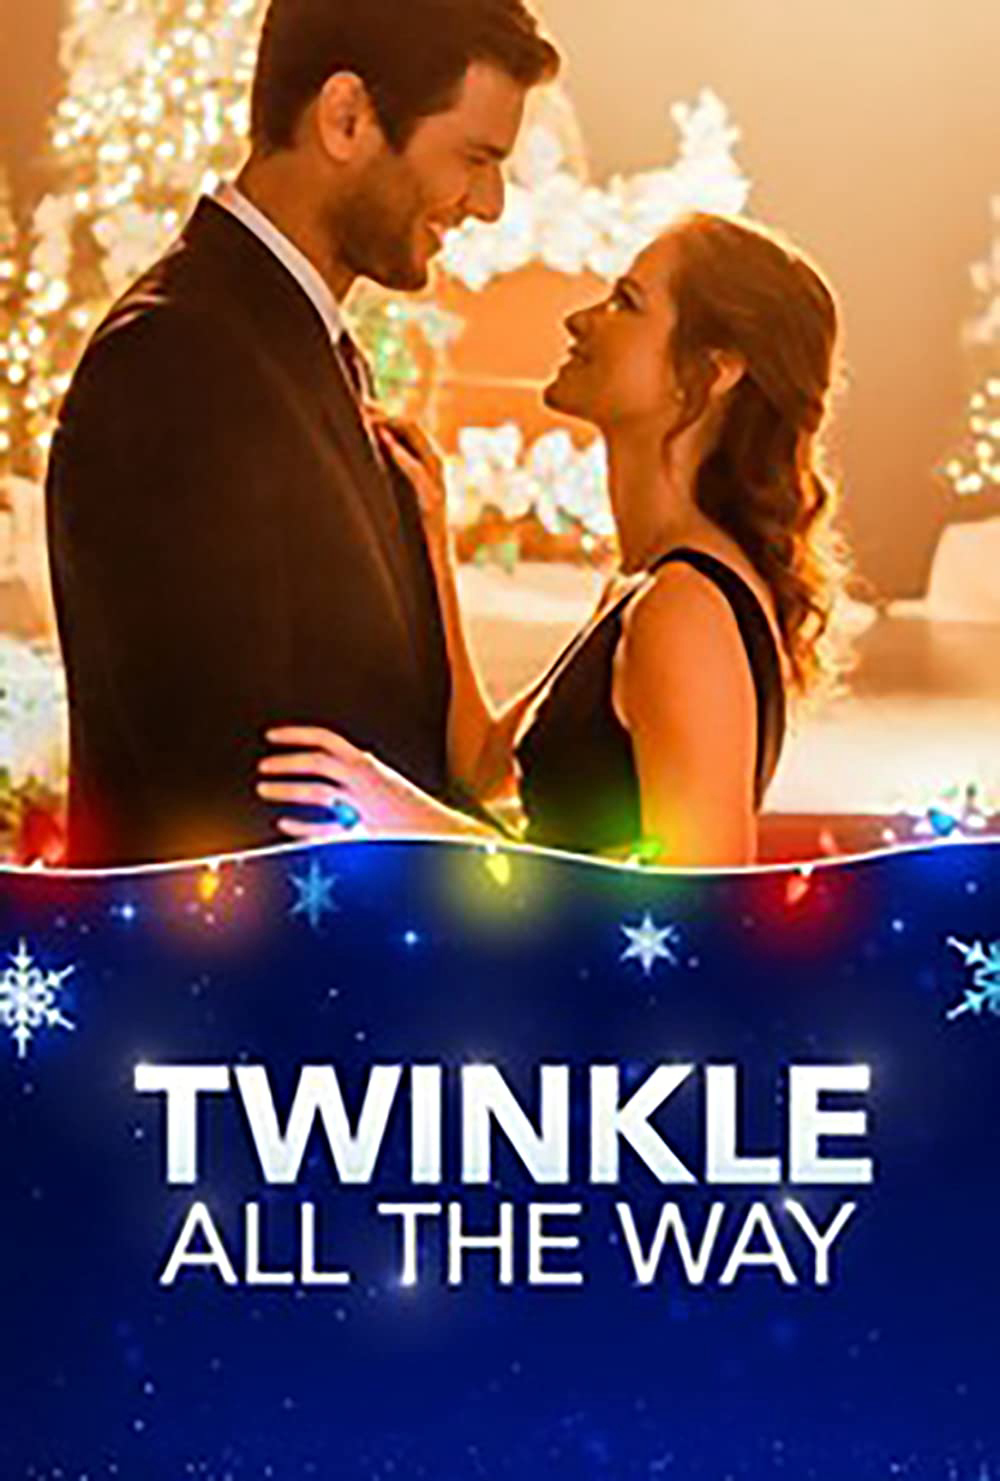 Poster Phim Giáng Sinh Diệu Kỳ (Twinkle All The Way)